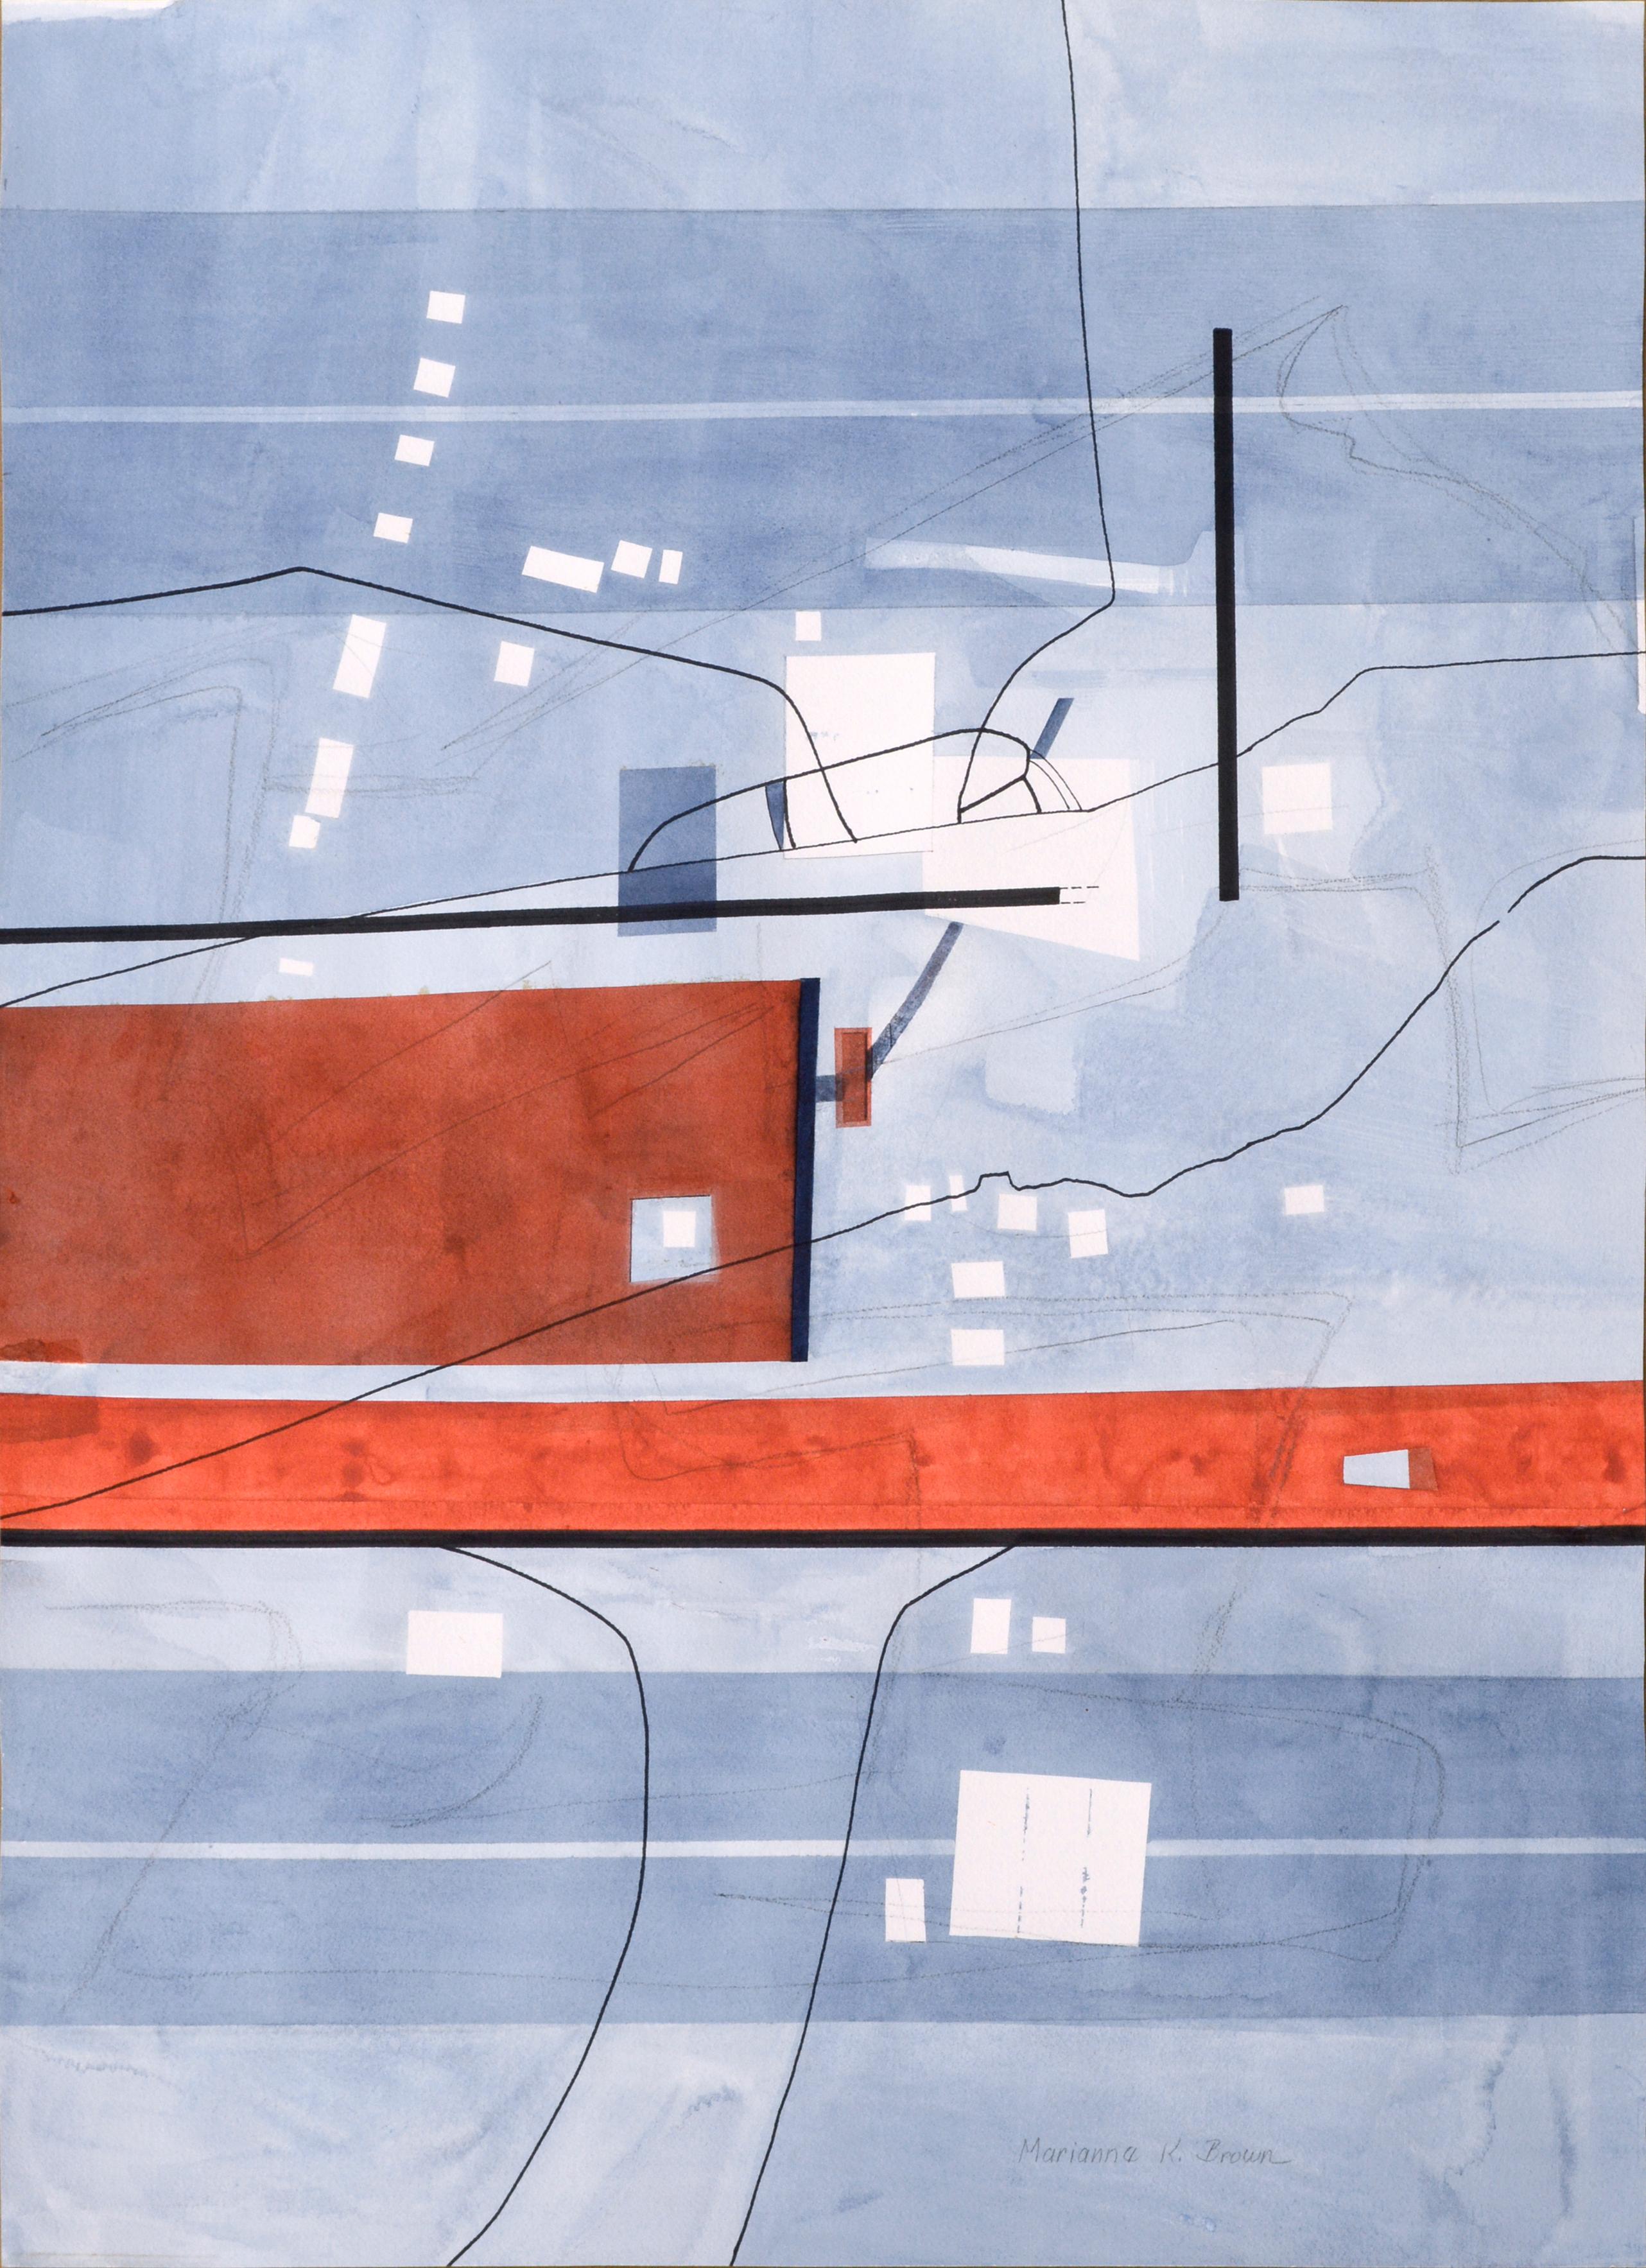 Marianne K. Brown Abstract Drawing - "Roads and Things" Geometric Abstract in Greyscale & Red